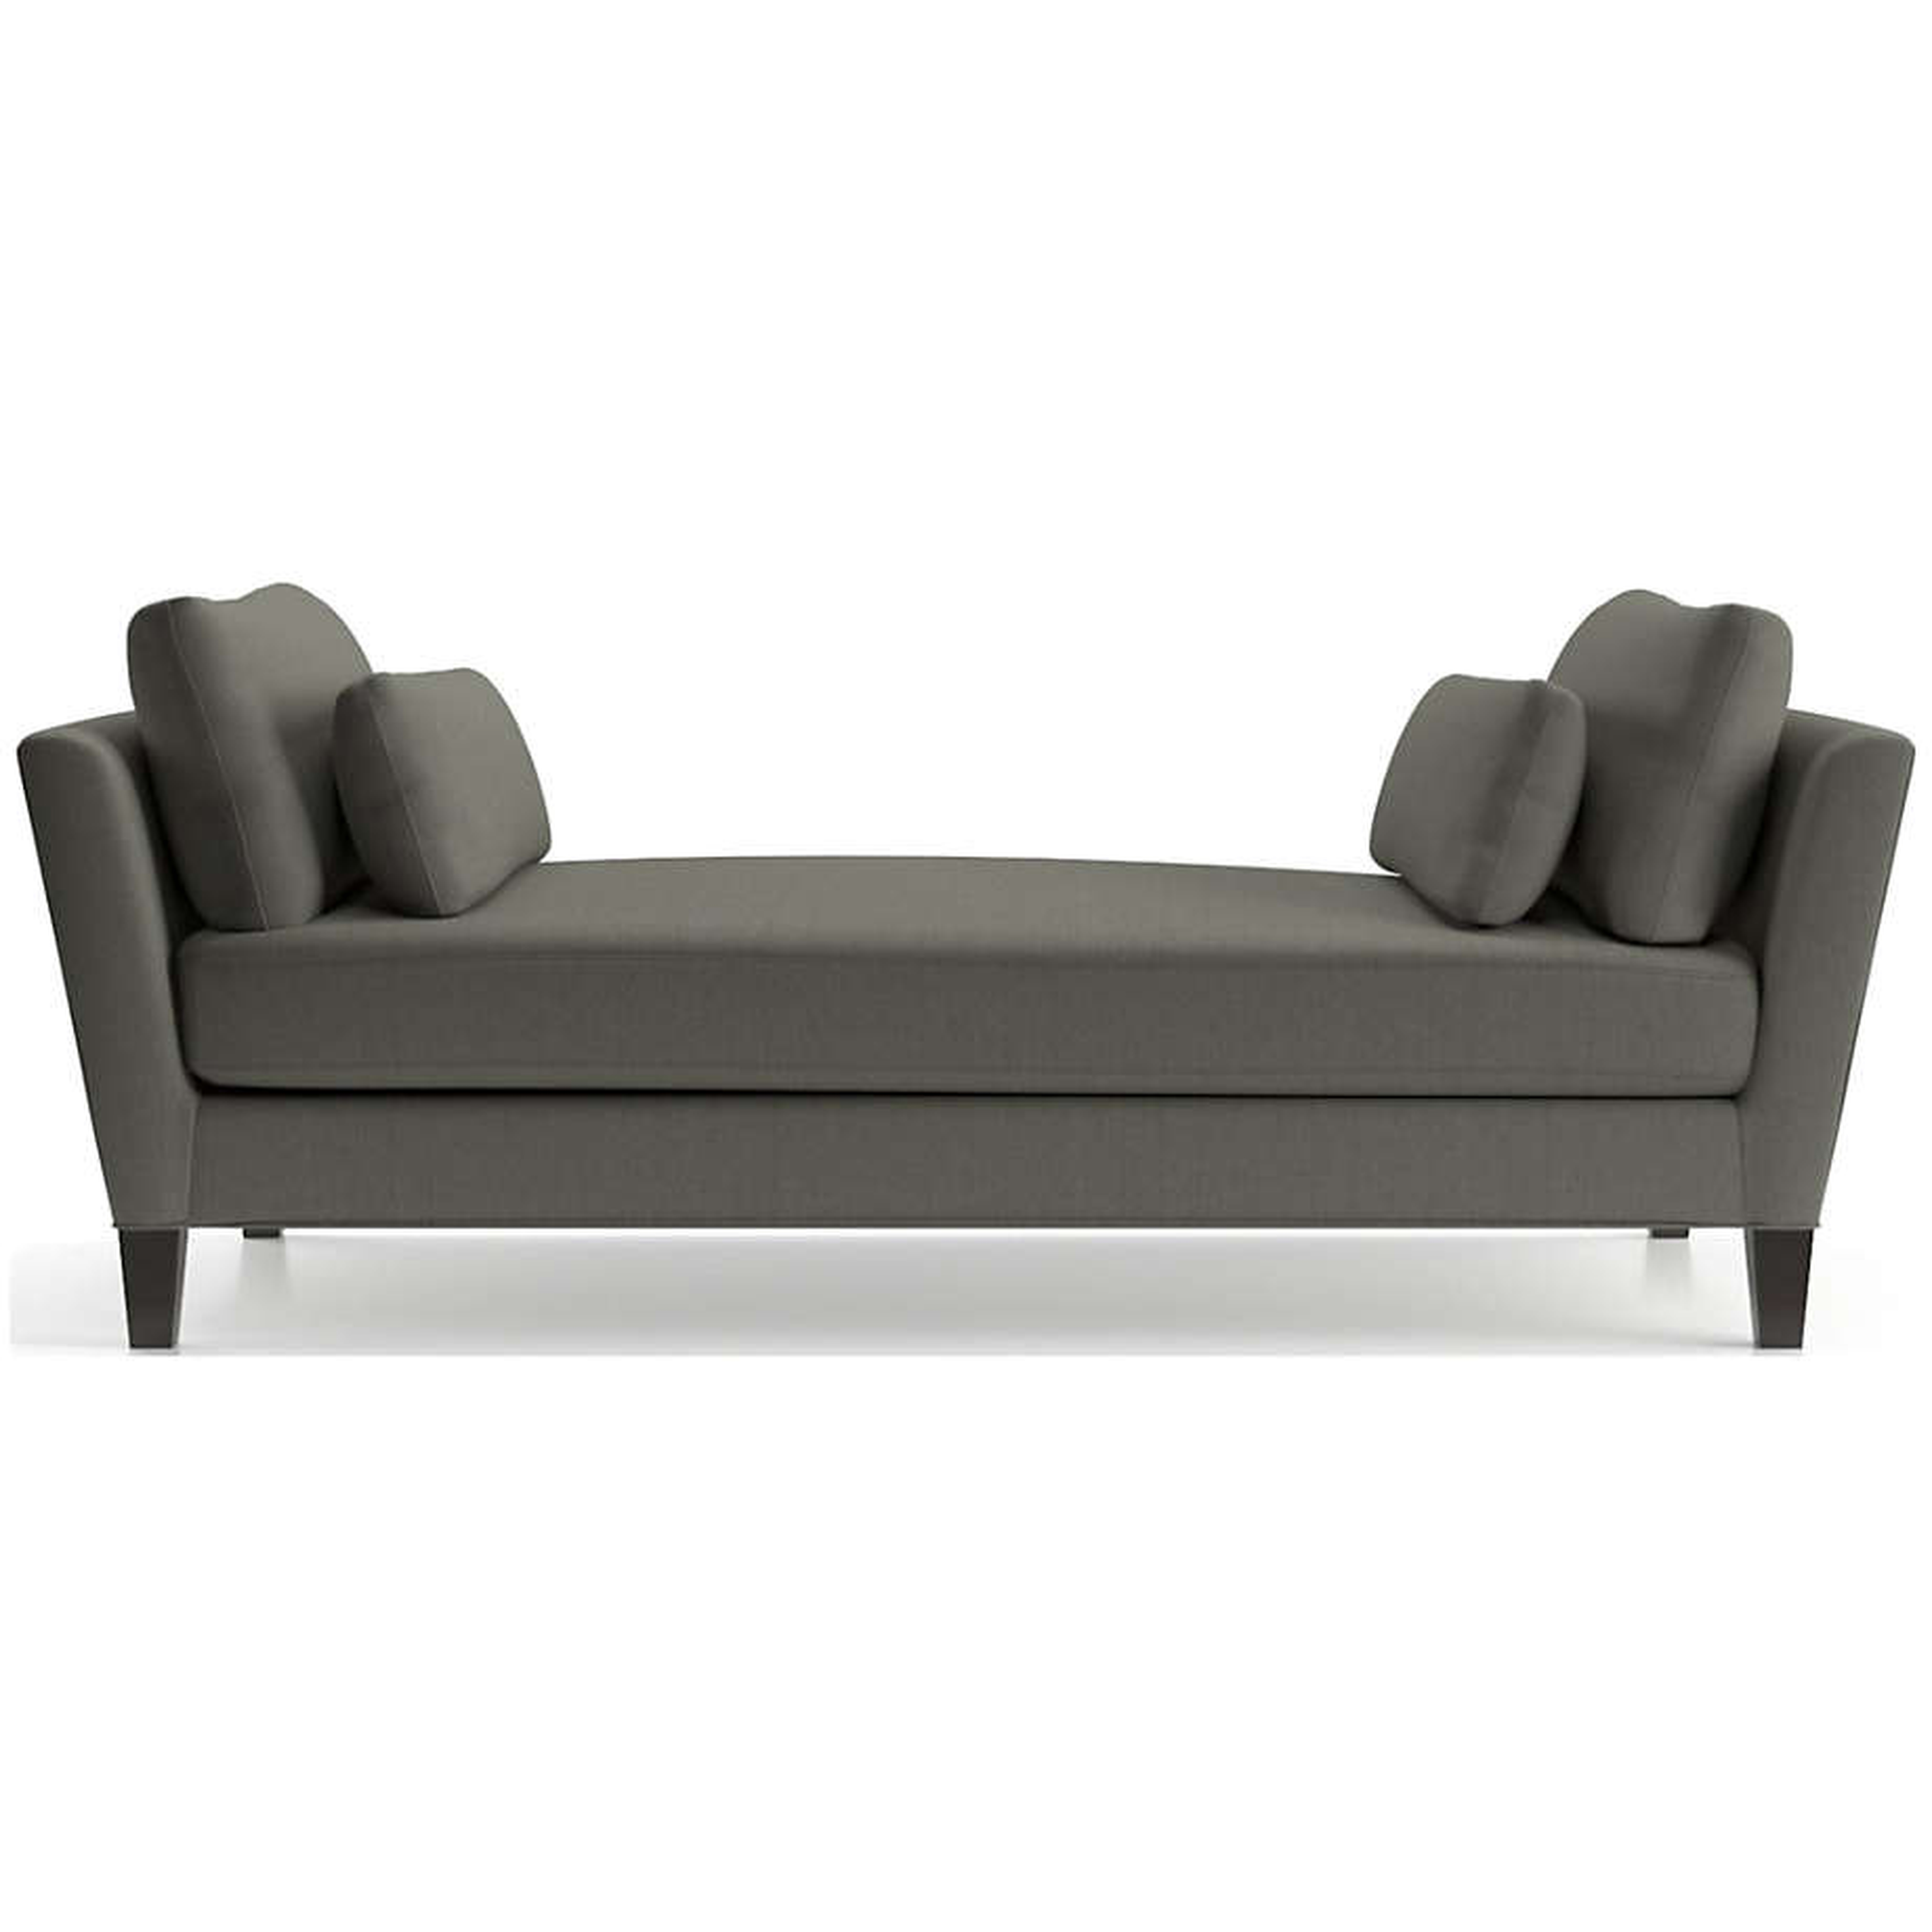 Marlowe Daybed Bench - Crate and Barrel